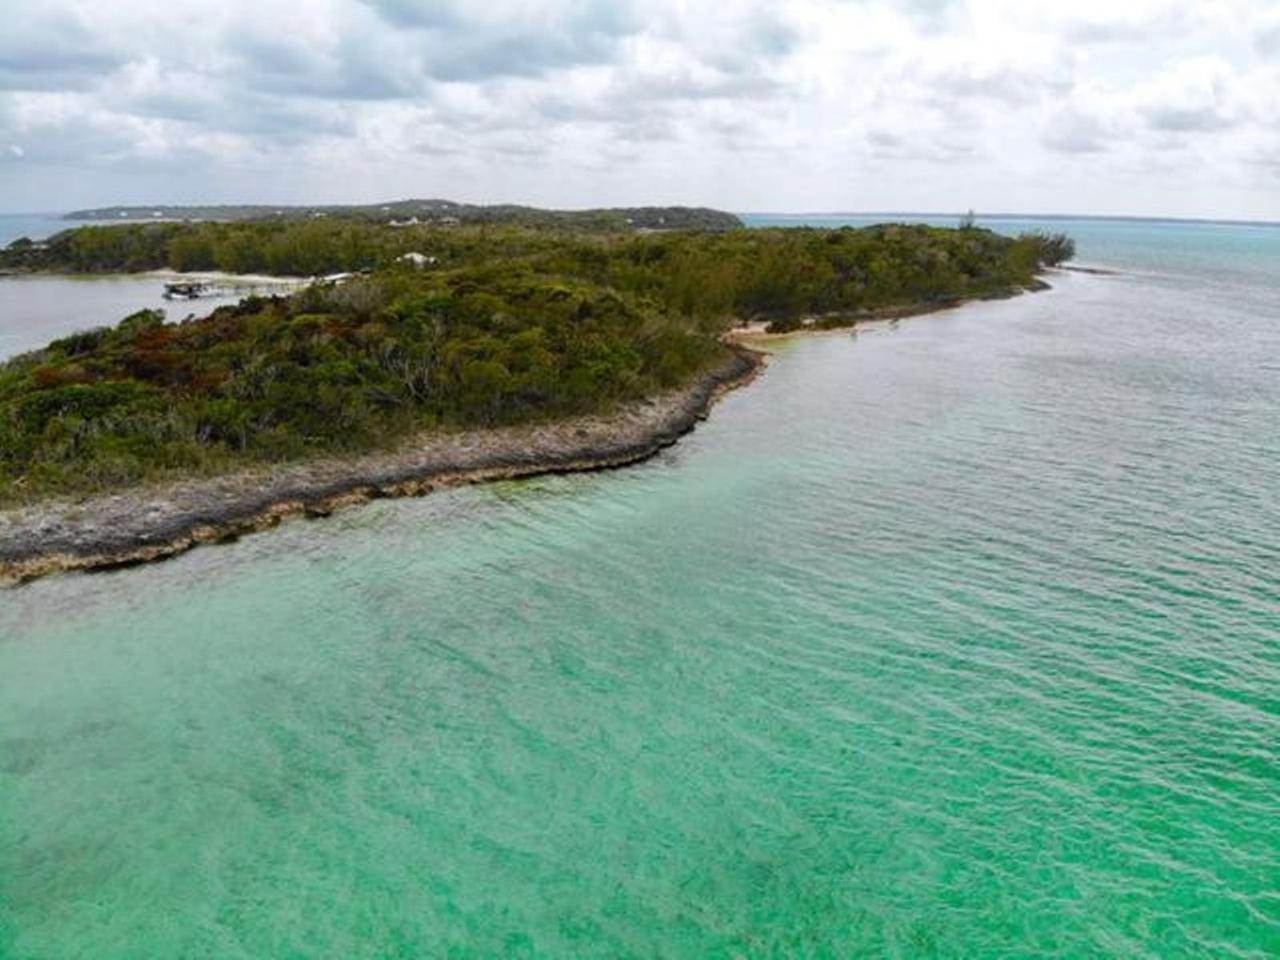 6. Lots / Acreage for Sale at Lubbers Quarters, Abaco, Bahamas